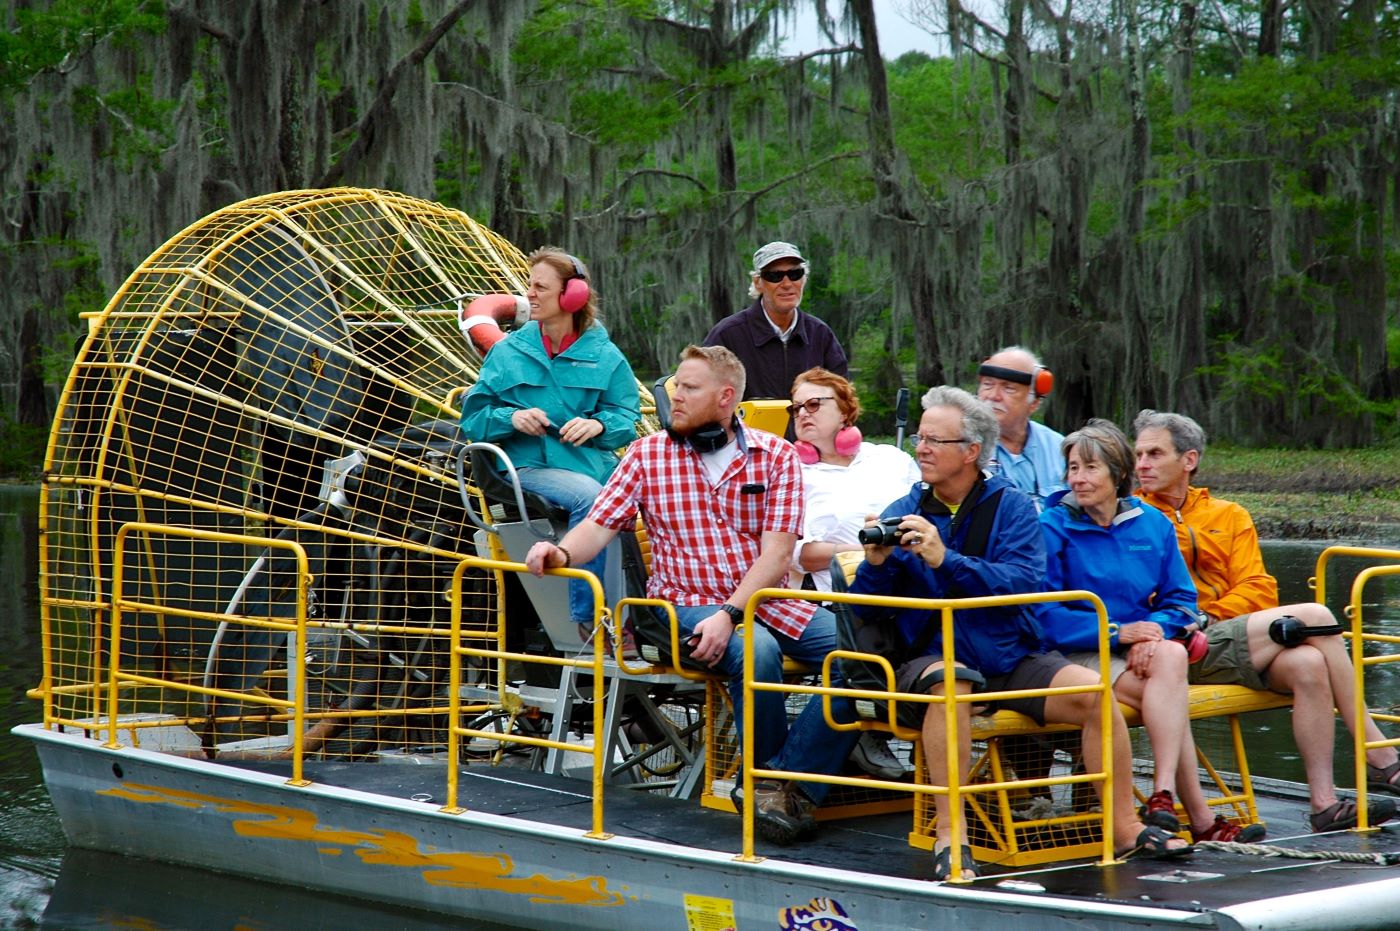 Caprio and colleagues on an airboat